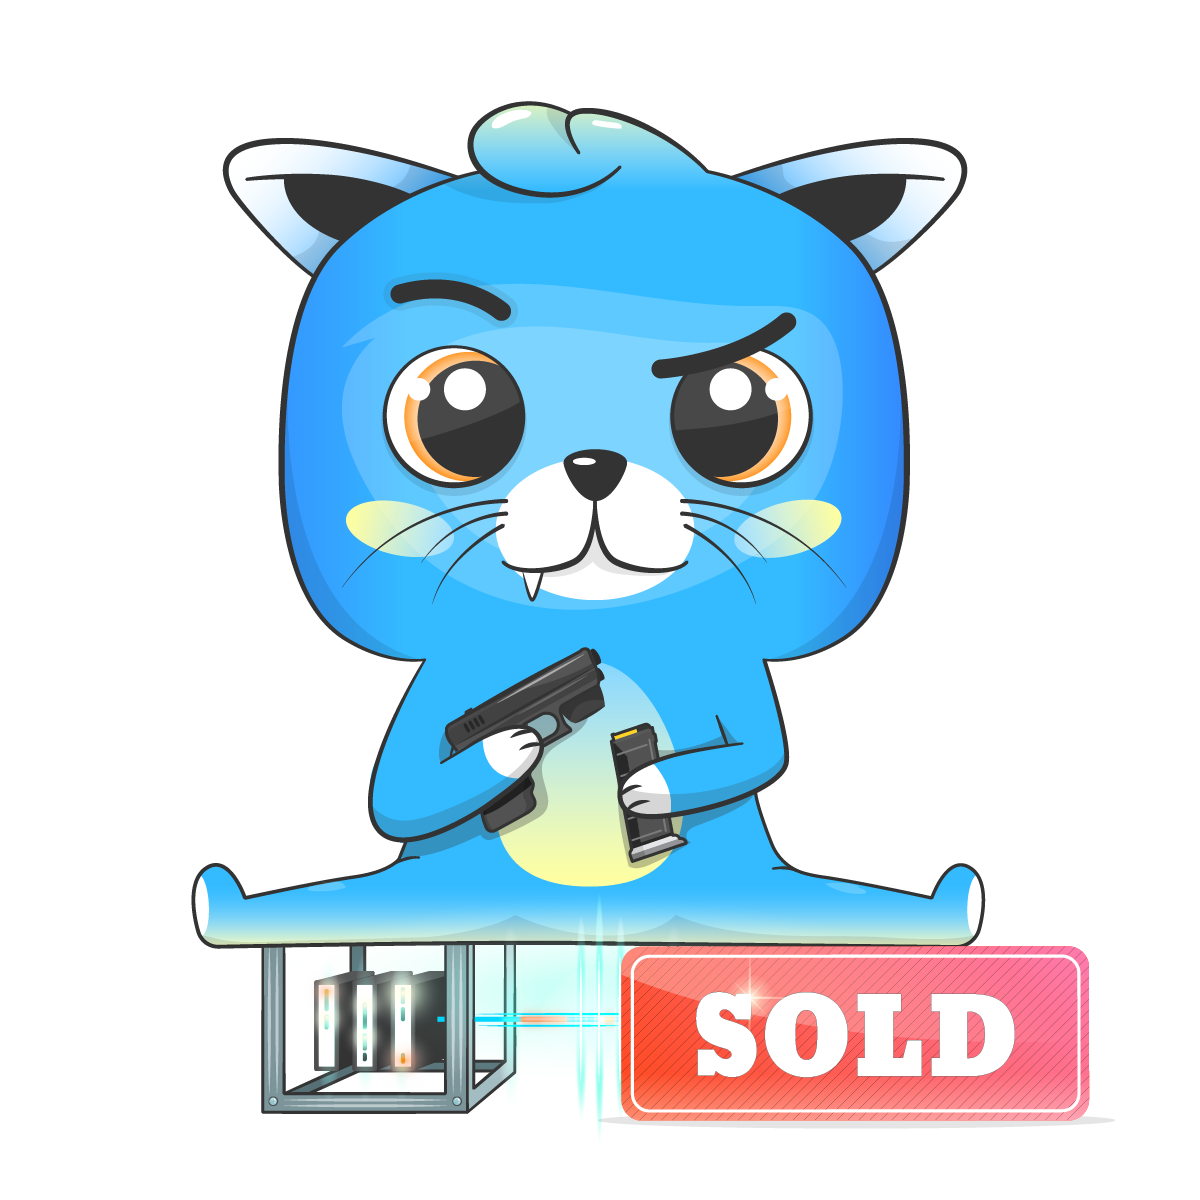 Synth_sold-01.png